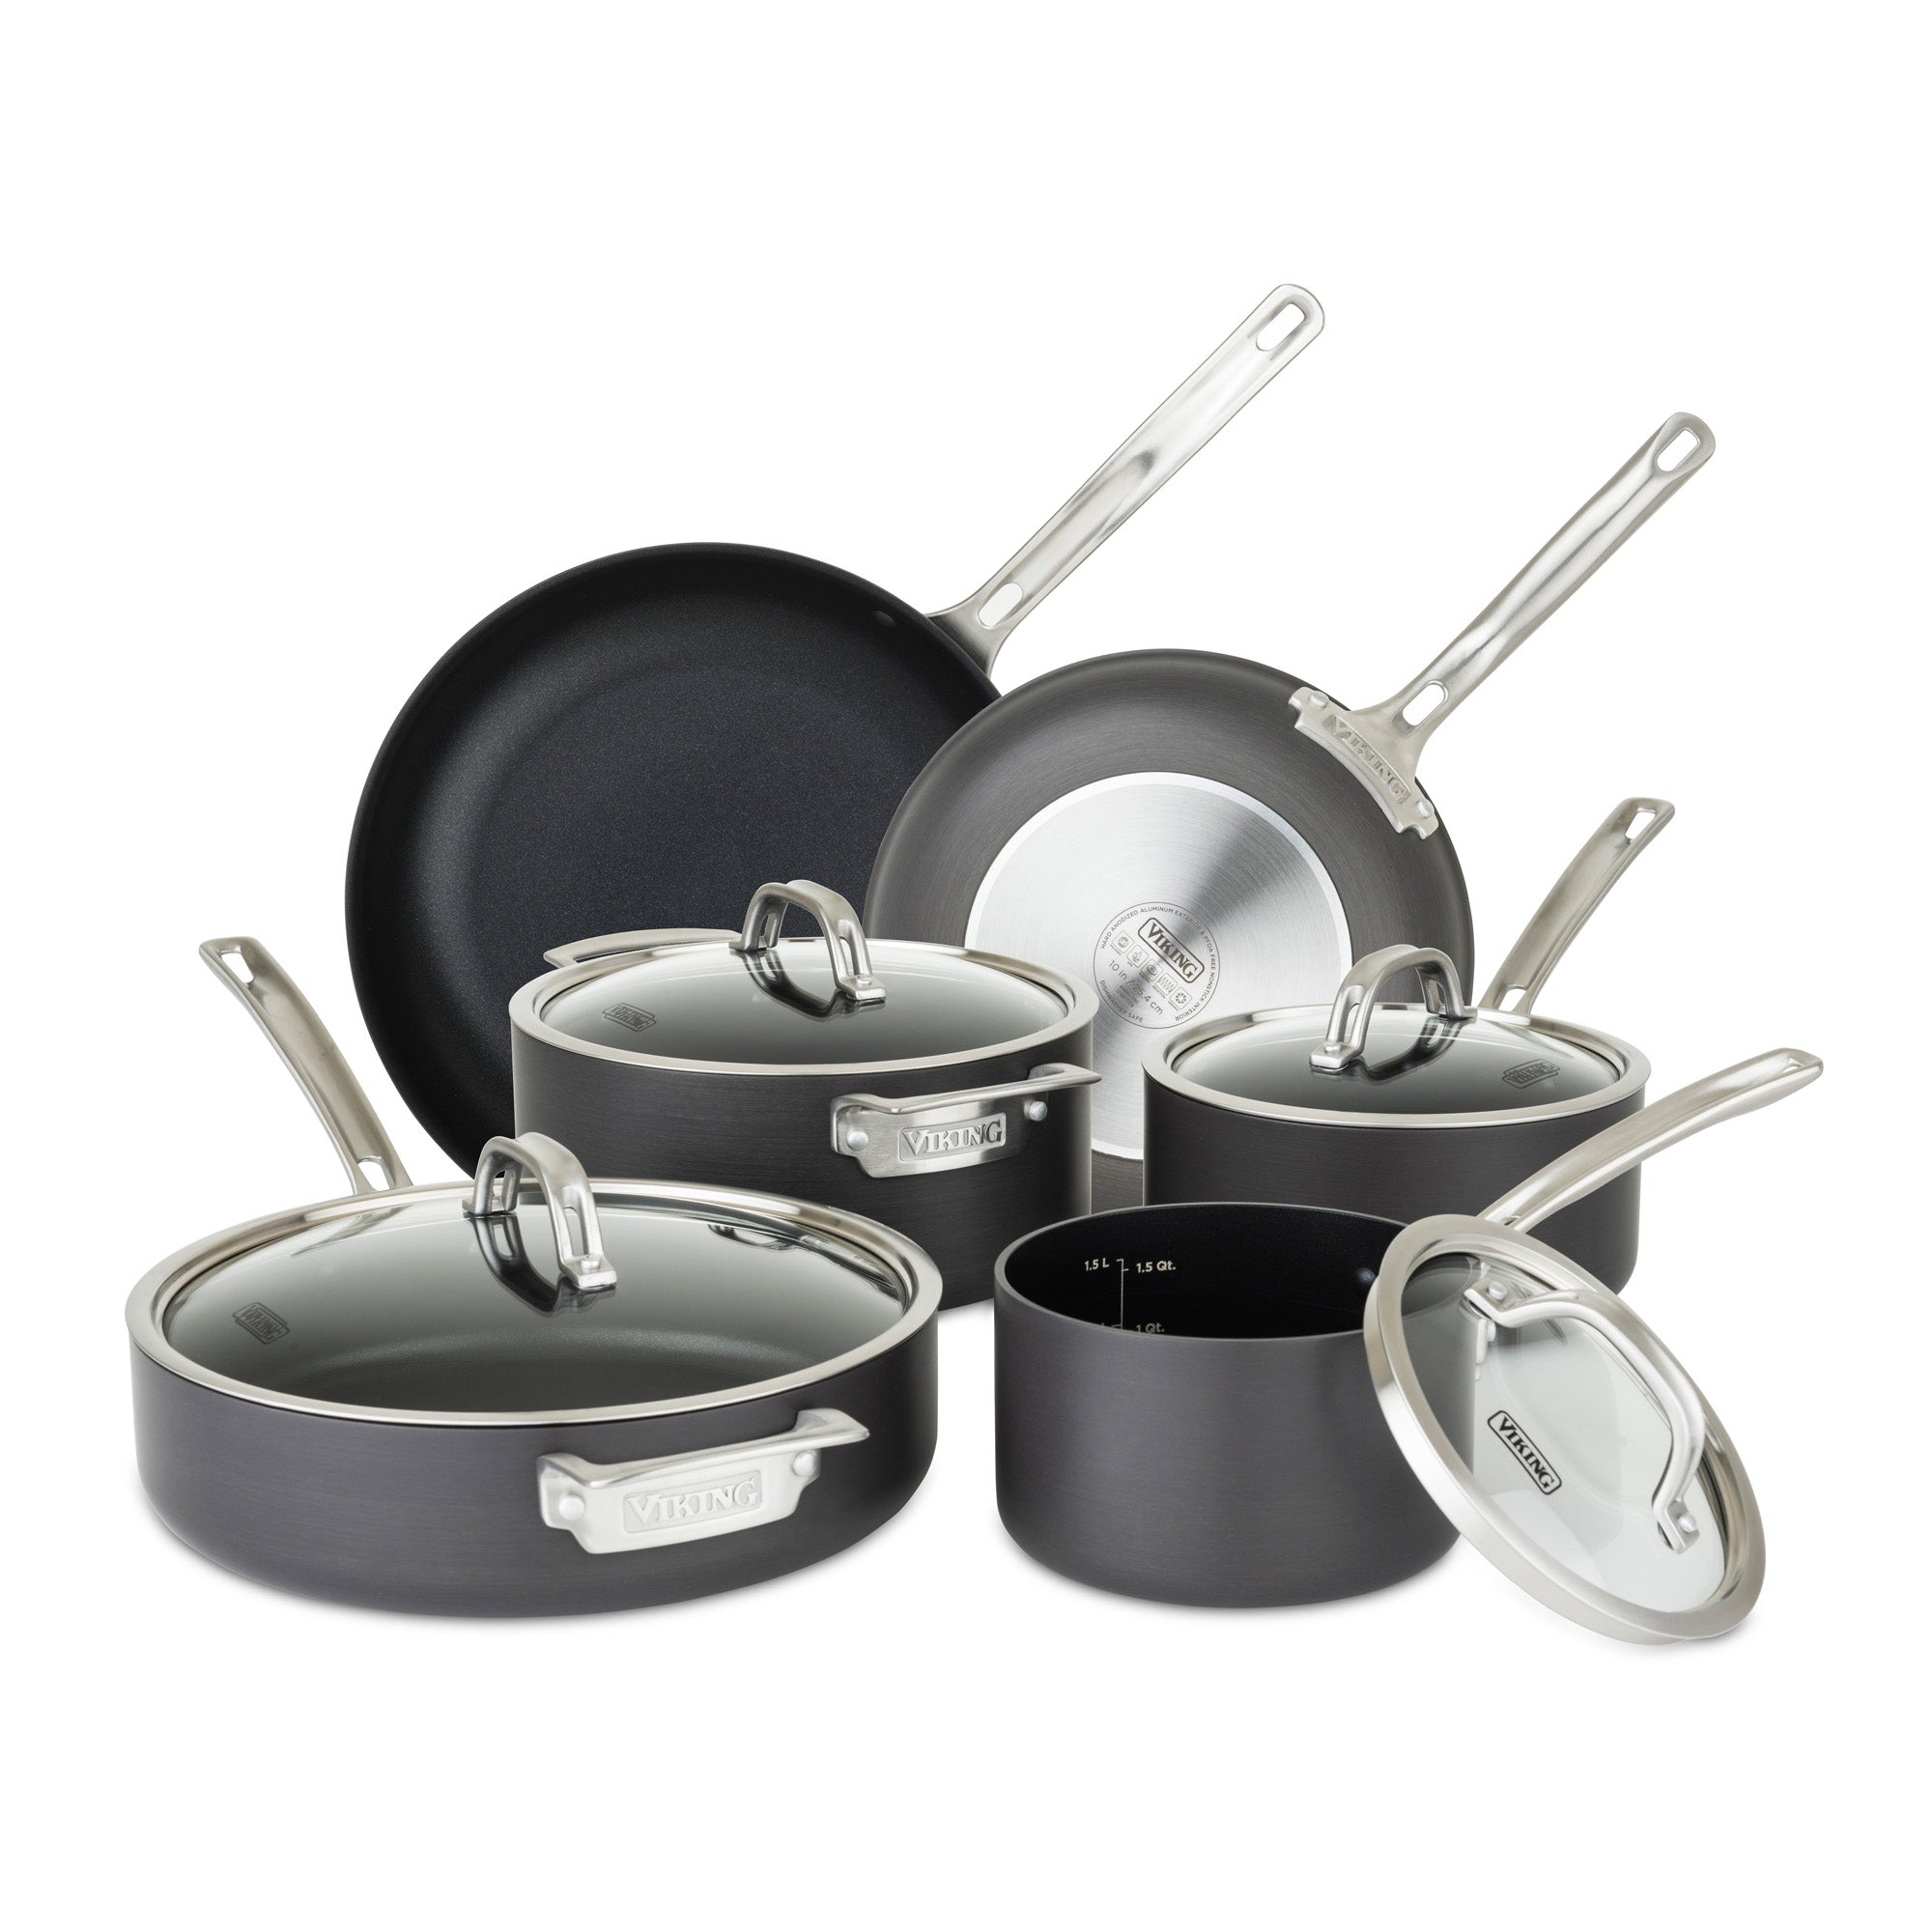 Viking Hard Anodized Nonstick 10-Piece Cookware Set with Glass Lids